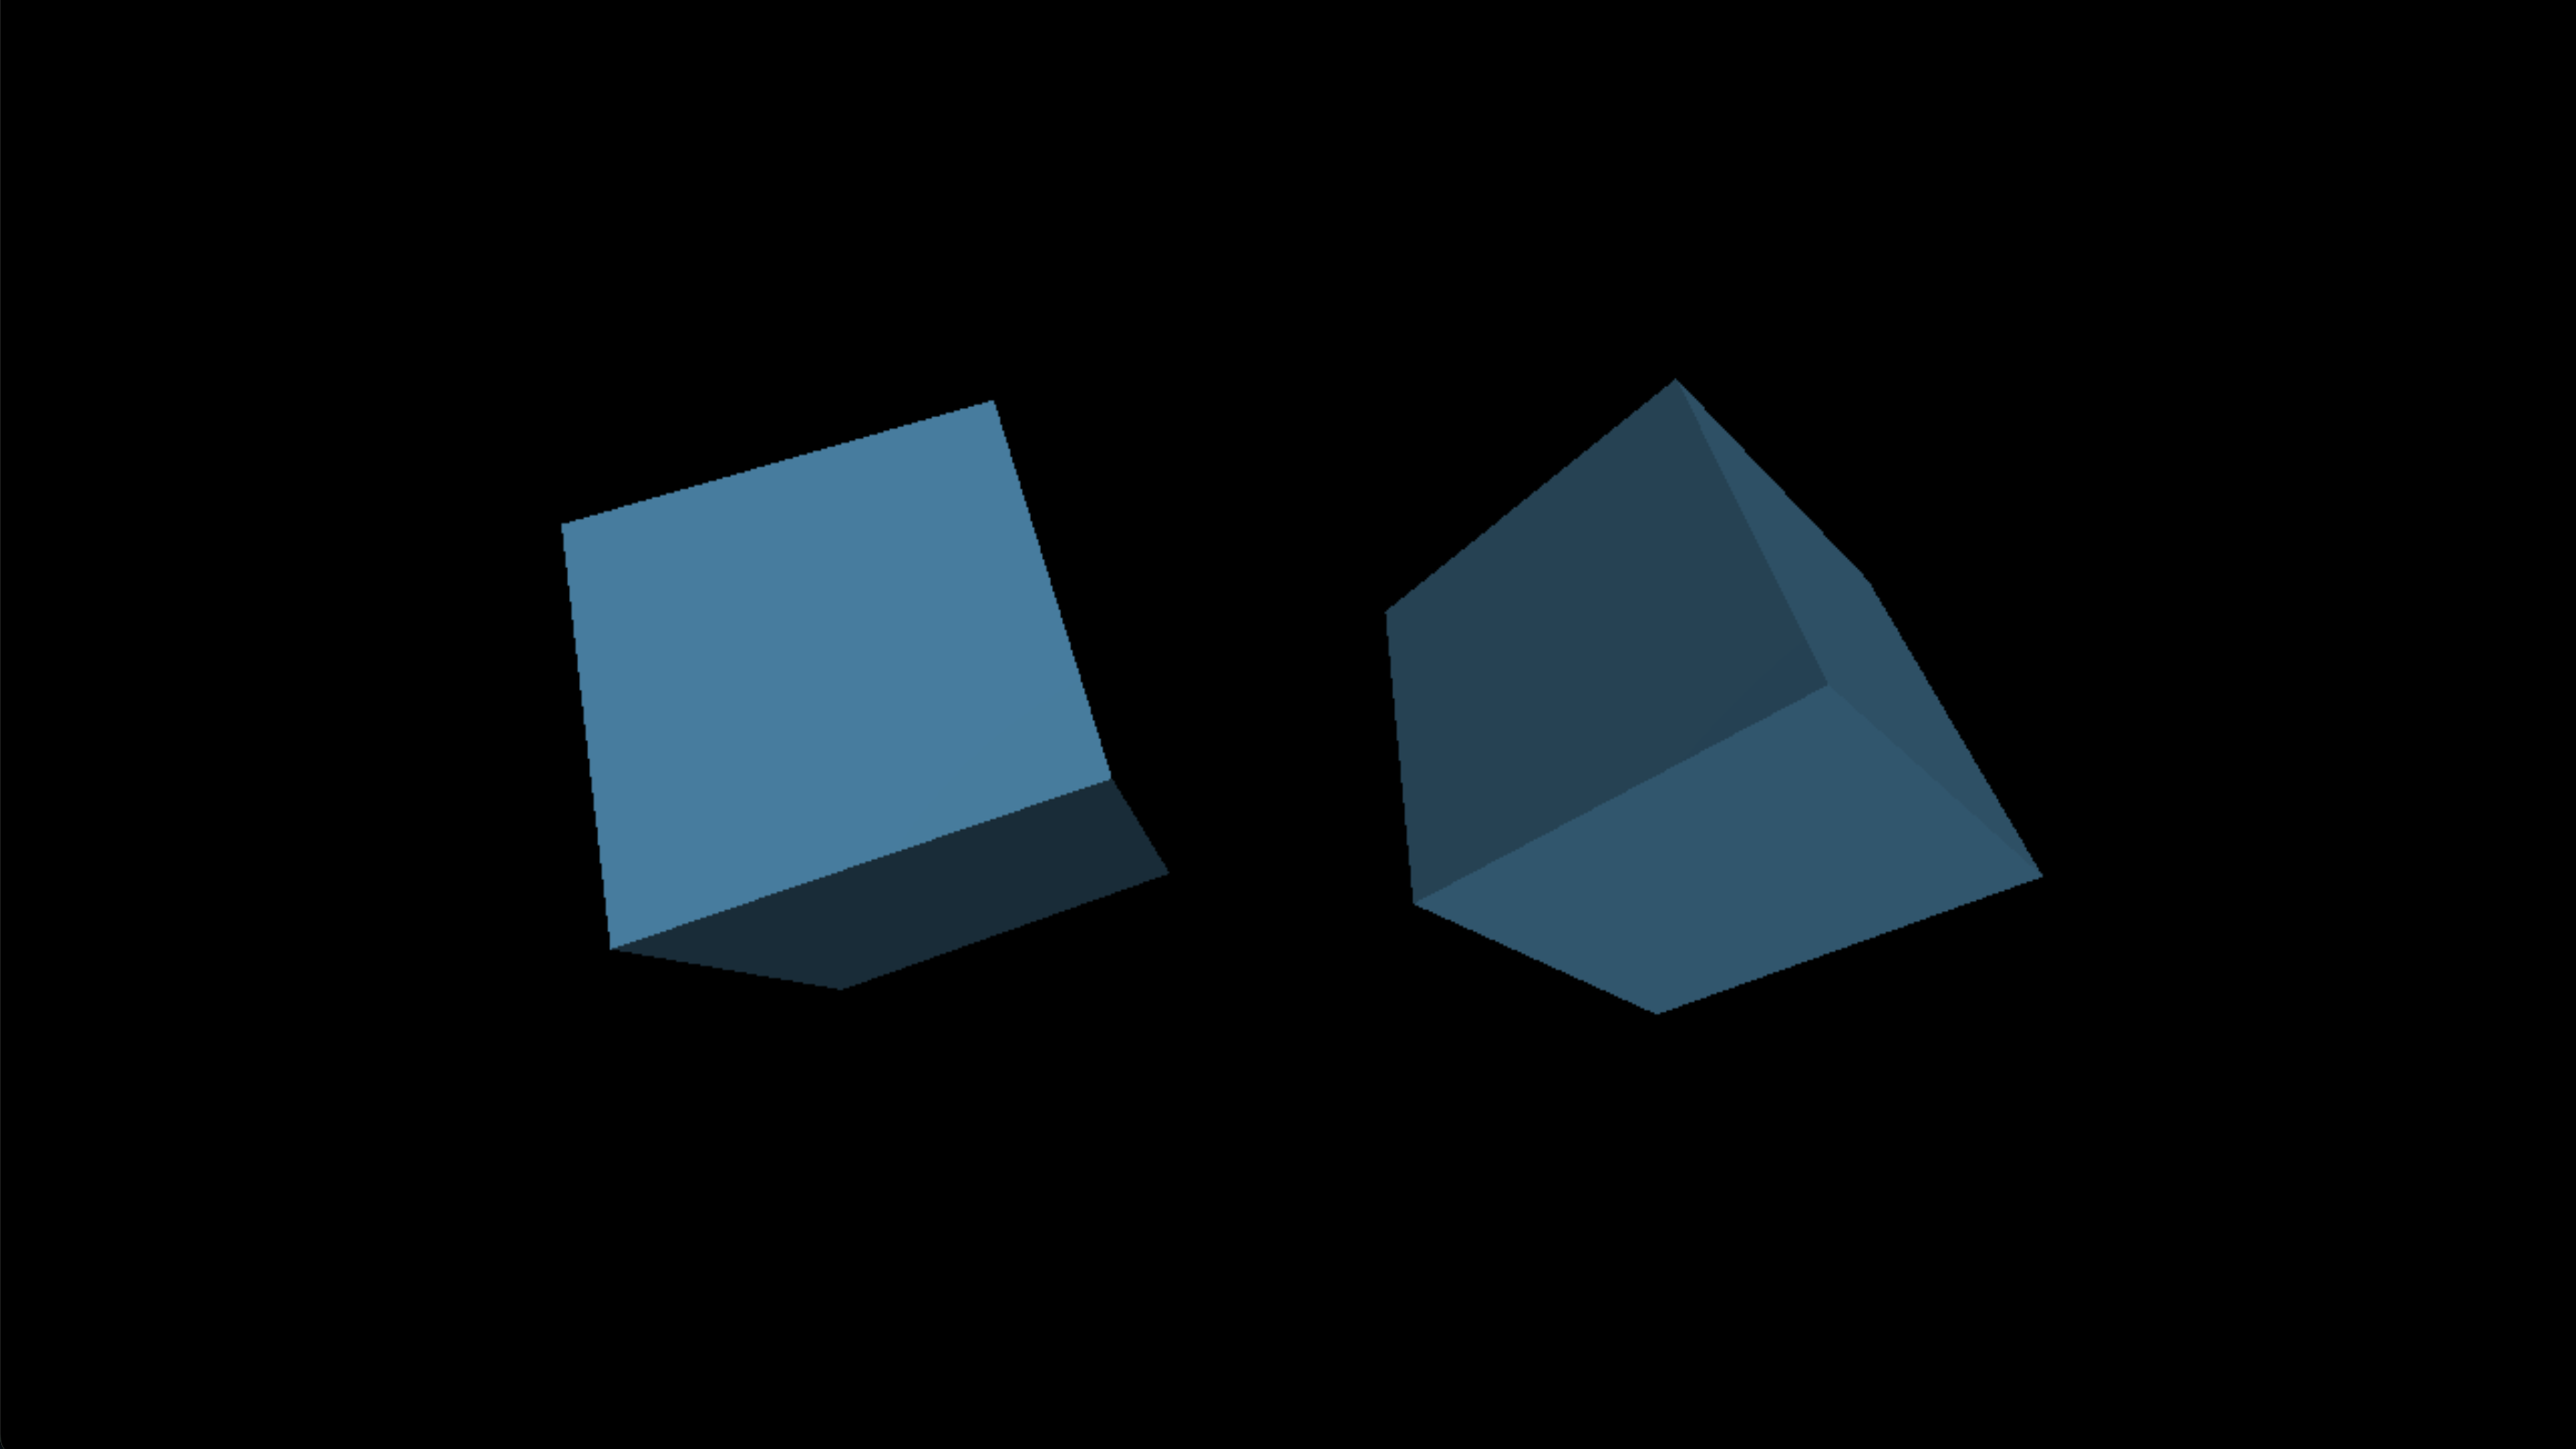 Two blue cubes